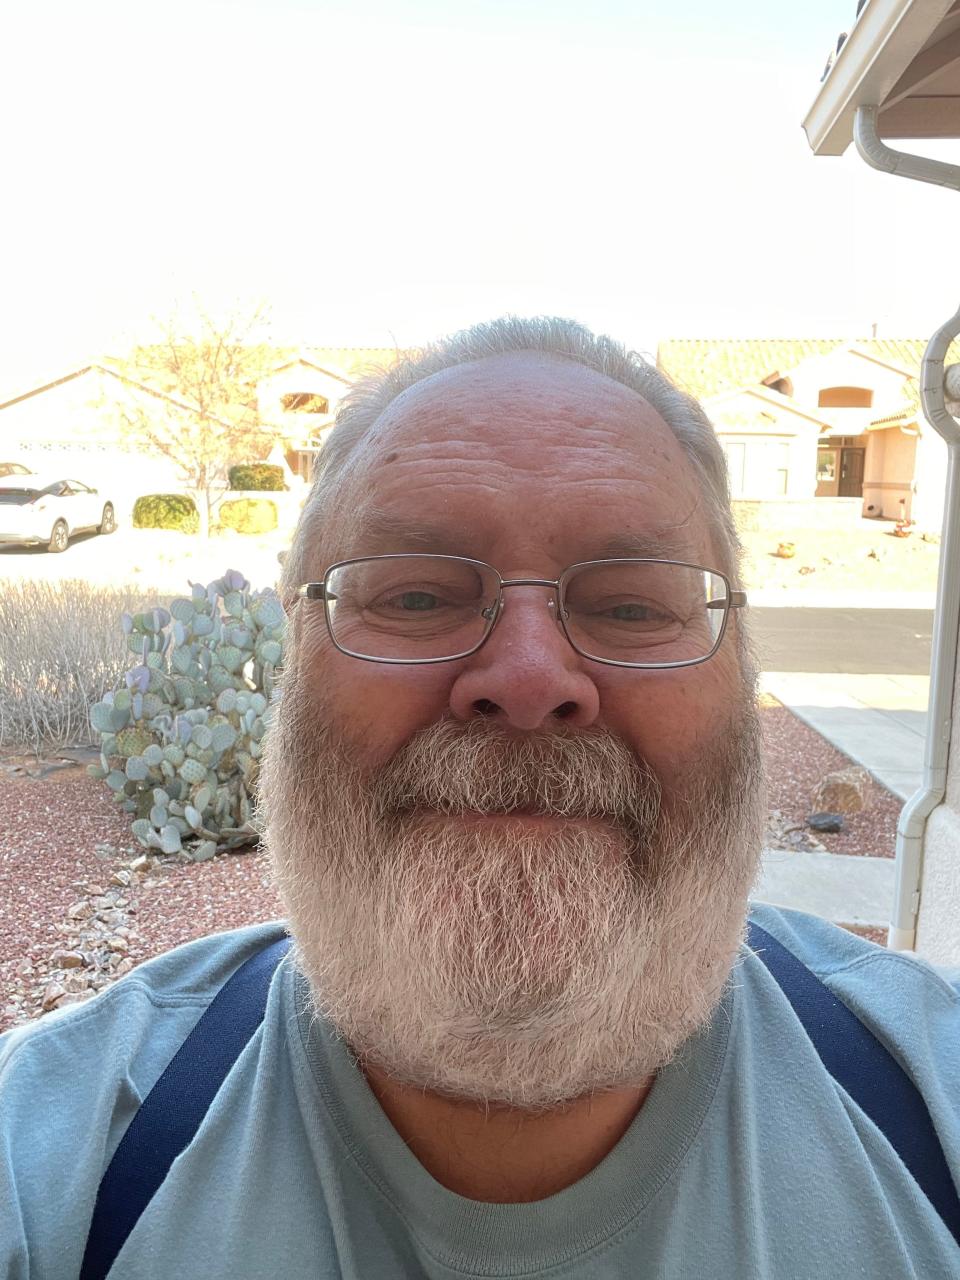 Peter Plamondon, 67, is living a comfortable retirement in the Sonoran Desert. But it could have been a lot more comfortable.